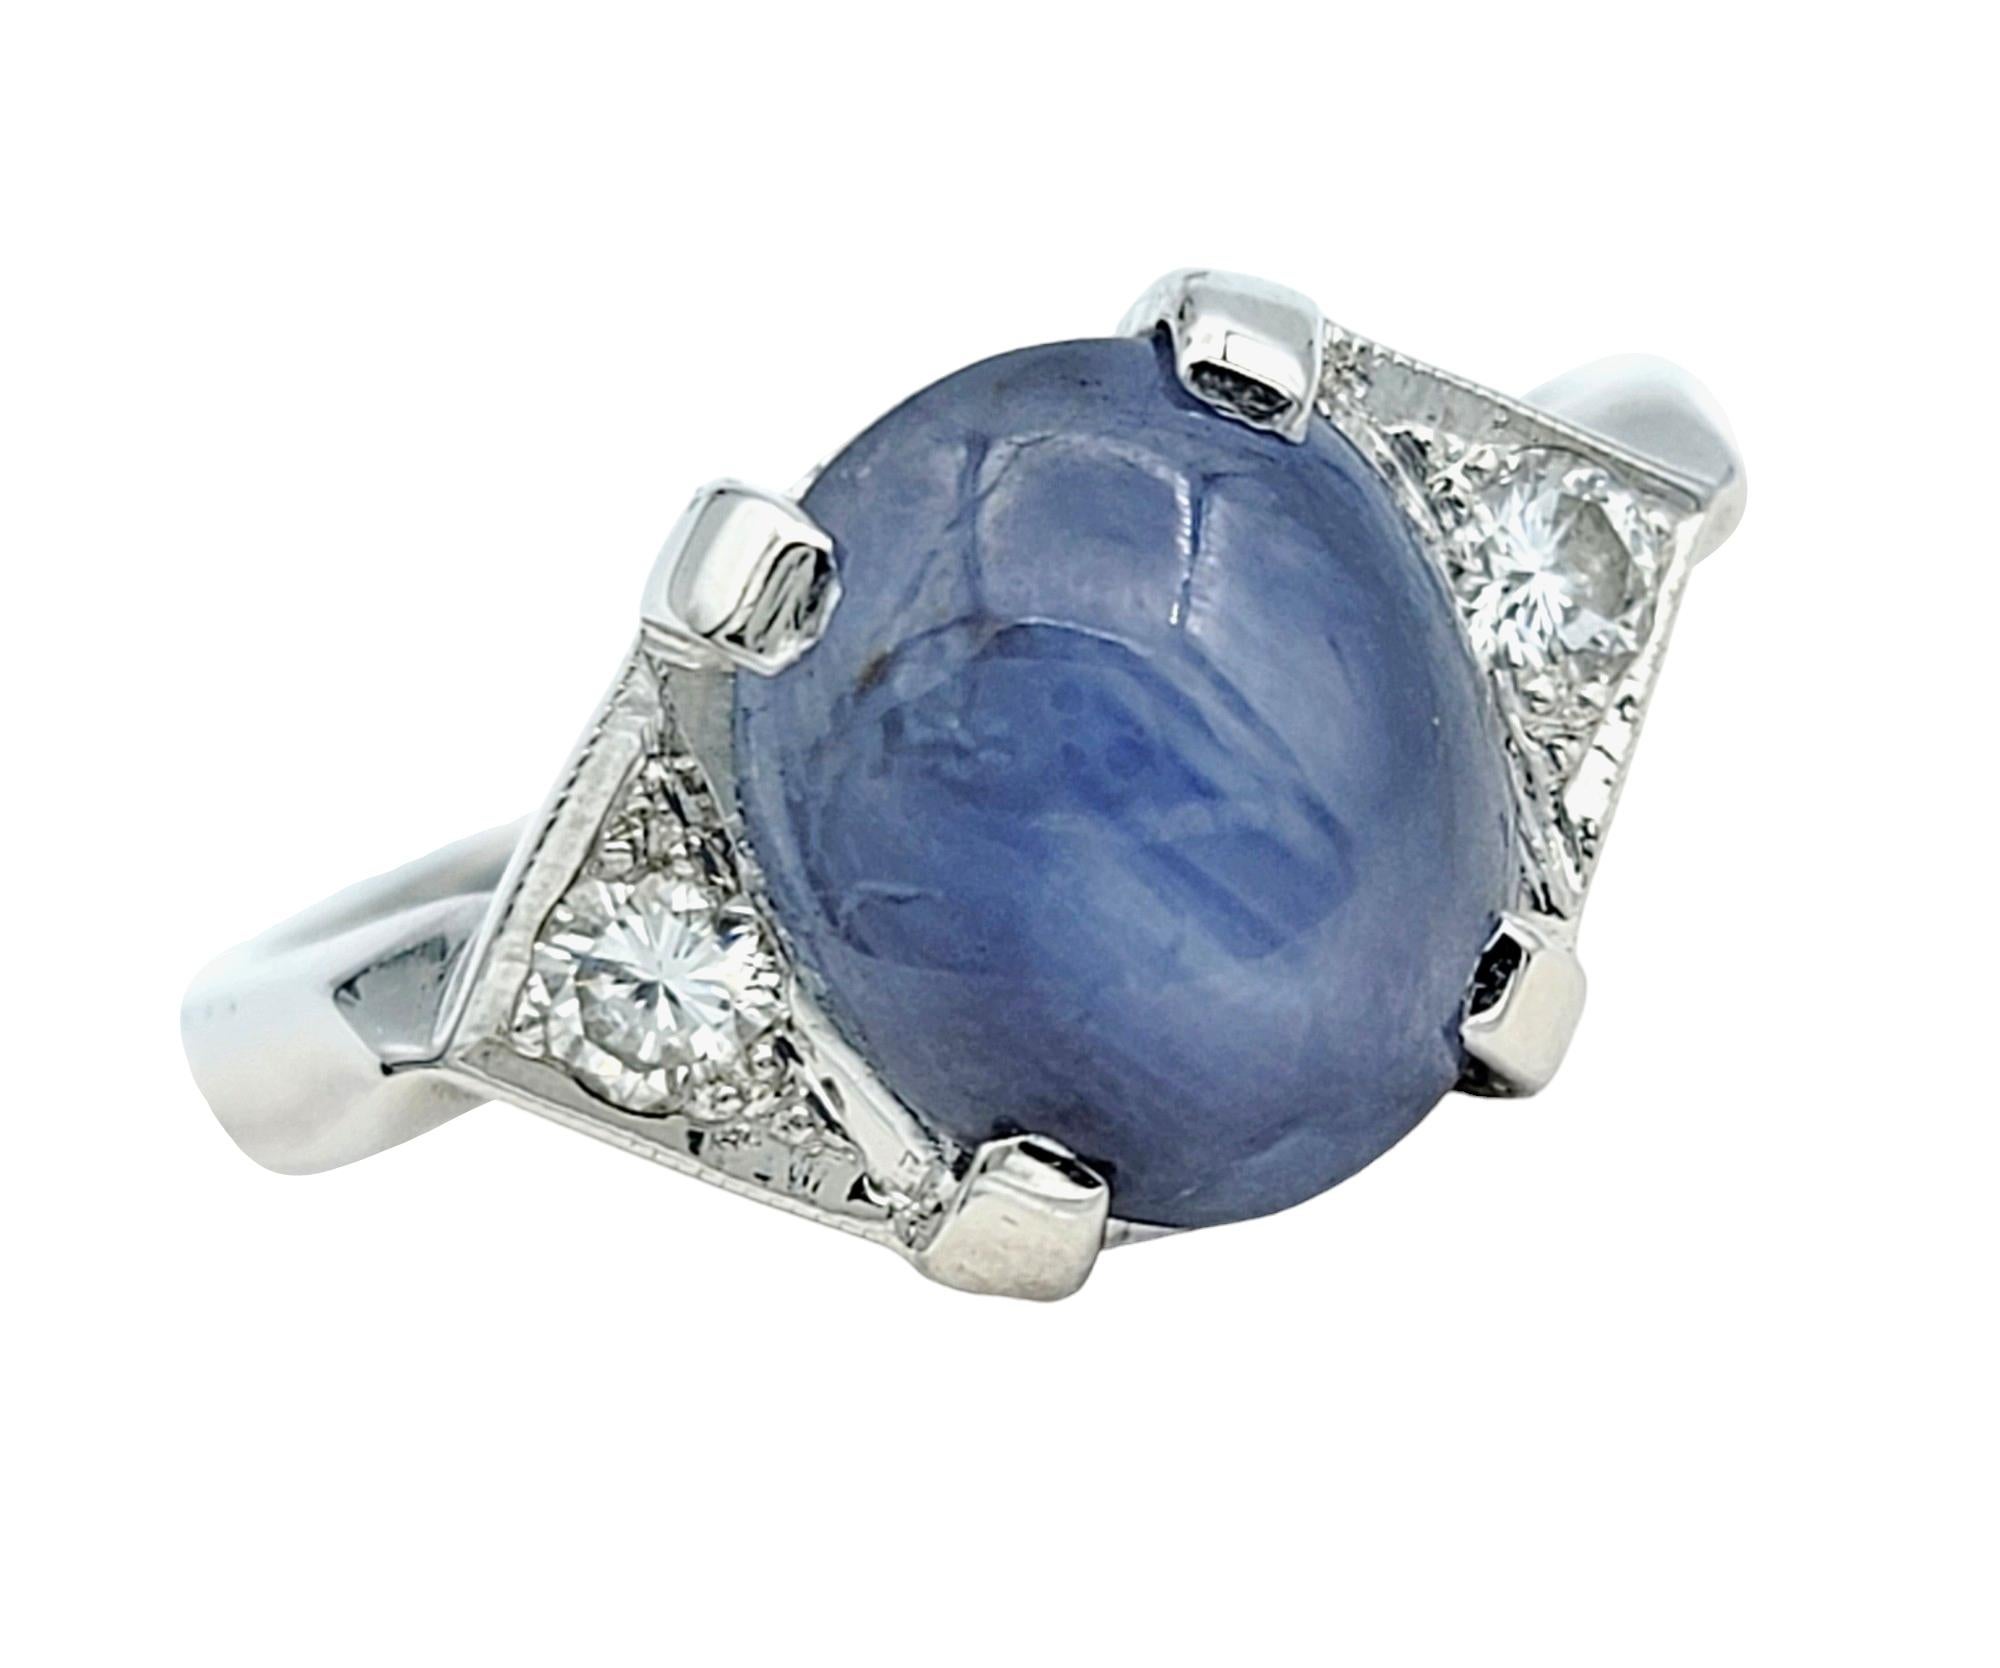 Ring Size: 6.75

Crafted with impeccable artistry, this stunning ring features a captivating oval cabochon star sapphire as its centerpiece, exuding celestial allure and mystique. The star sapphire, with its enchanting asterism that dances across